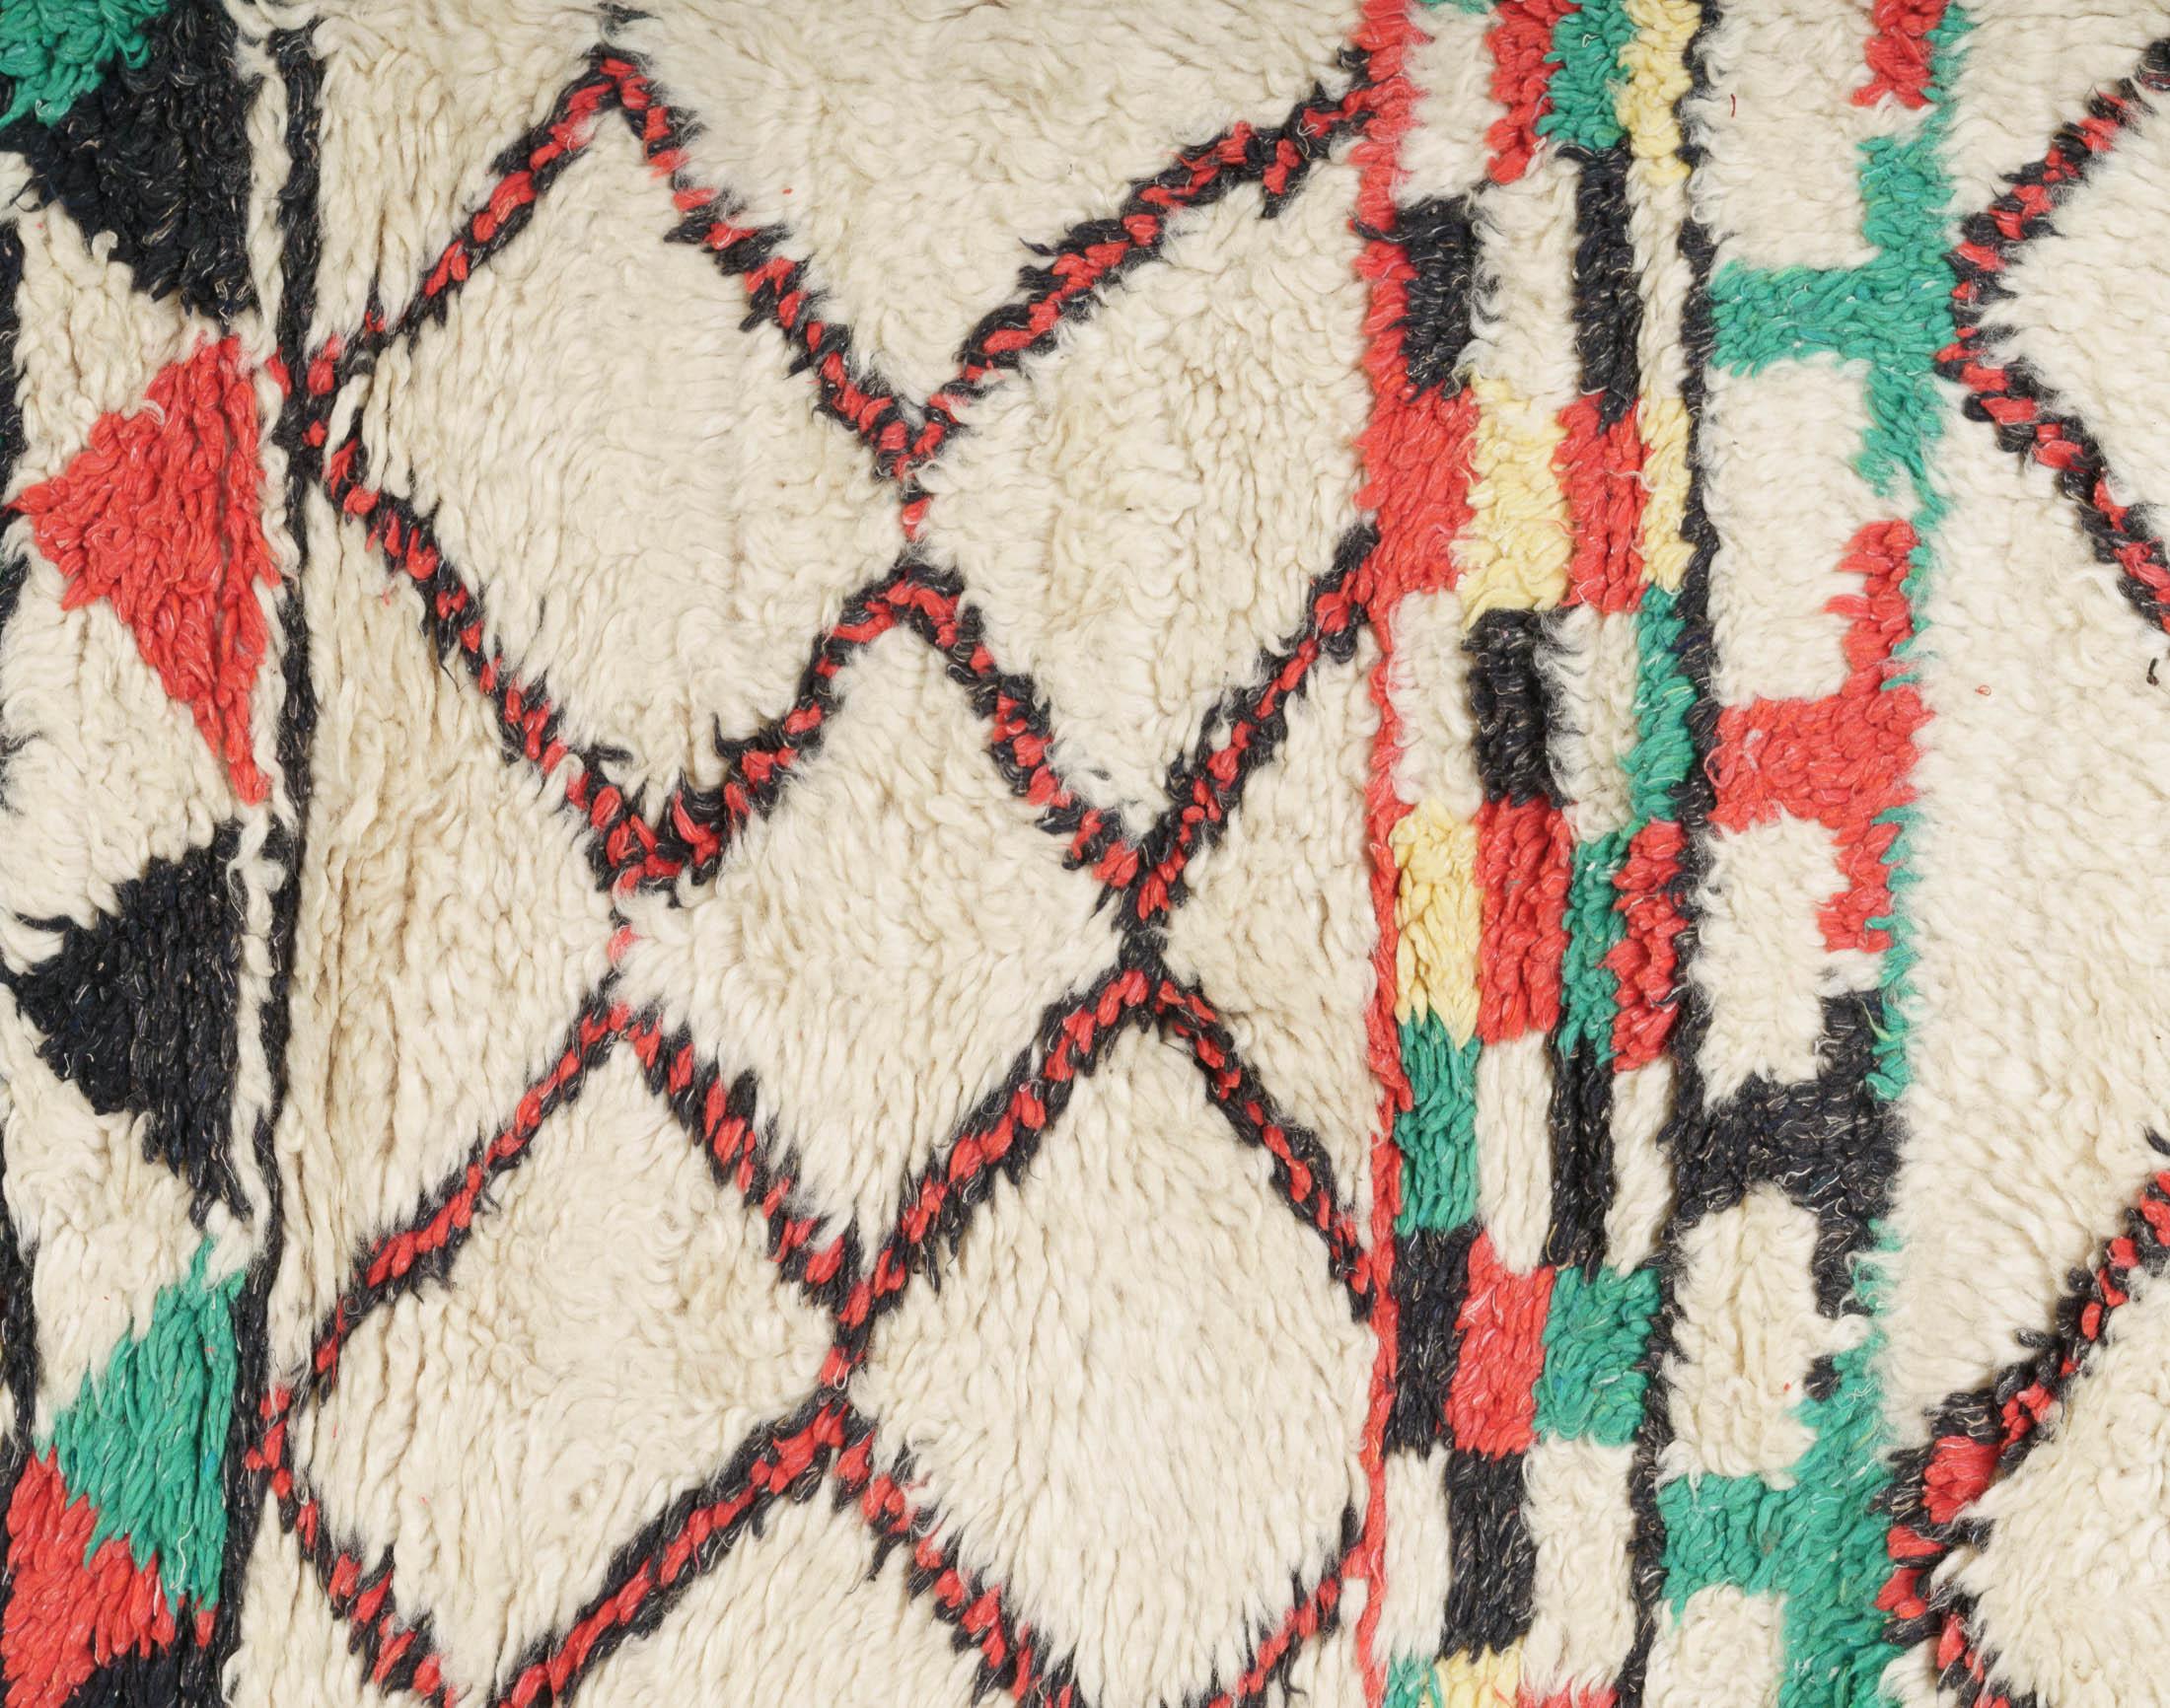 Classical Moroccan Berber rug from the Azilal region. Black, red, yellow and green pattern on natural off-white background. Medium-short pile.

This is an authentic Berber carpet from Morocco. In Berber tribes rugs are hand knotted by women in